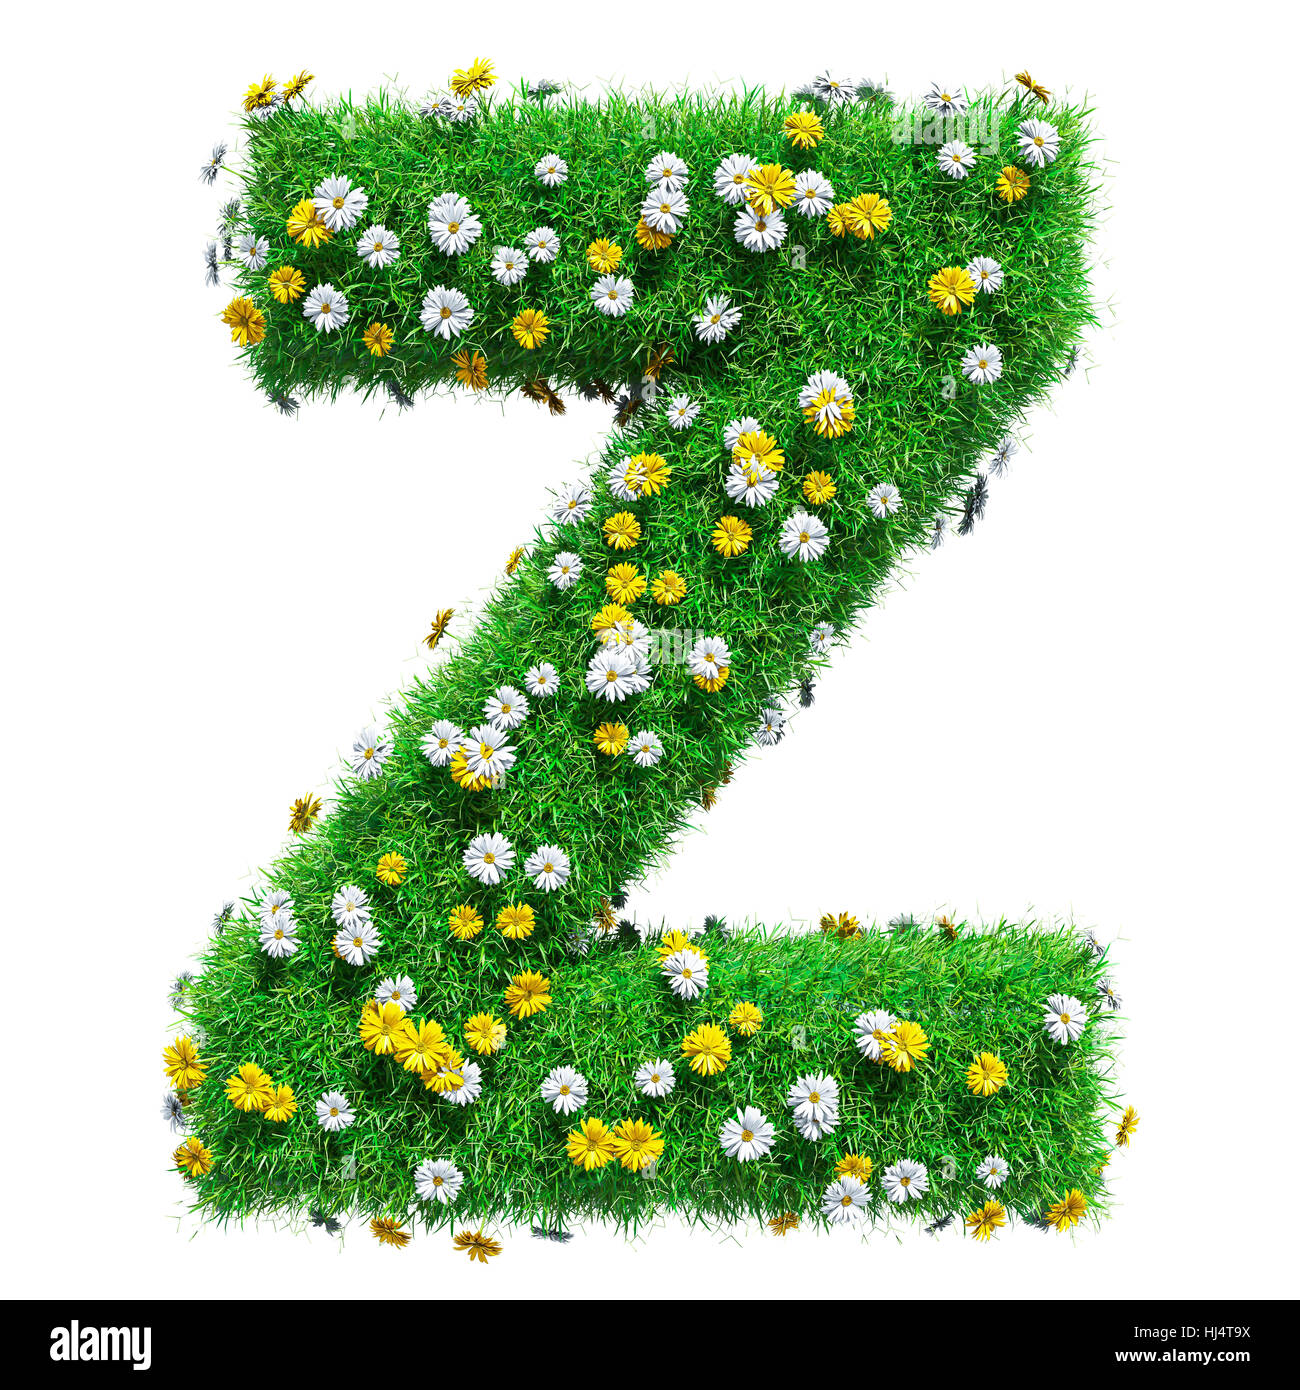 Letter Z Of Green Grass And Flowers. Isolated On White Background ...